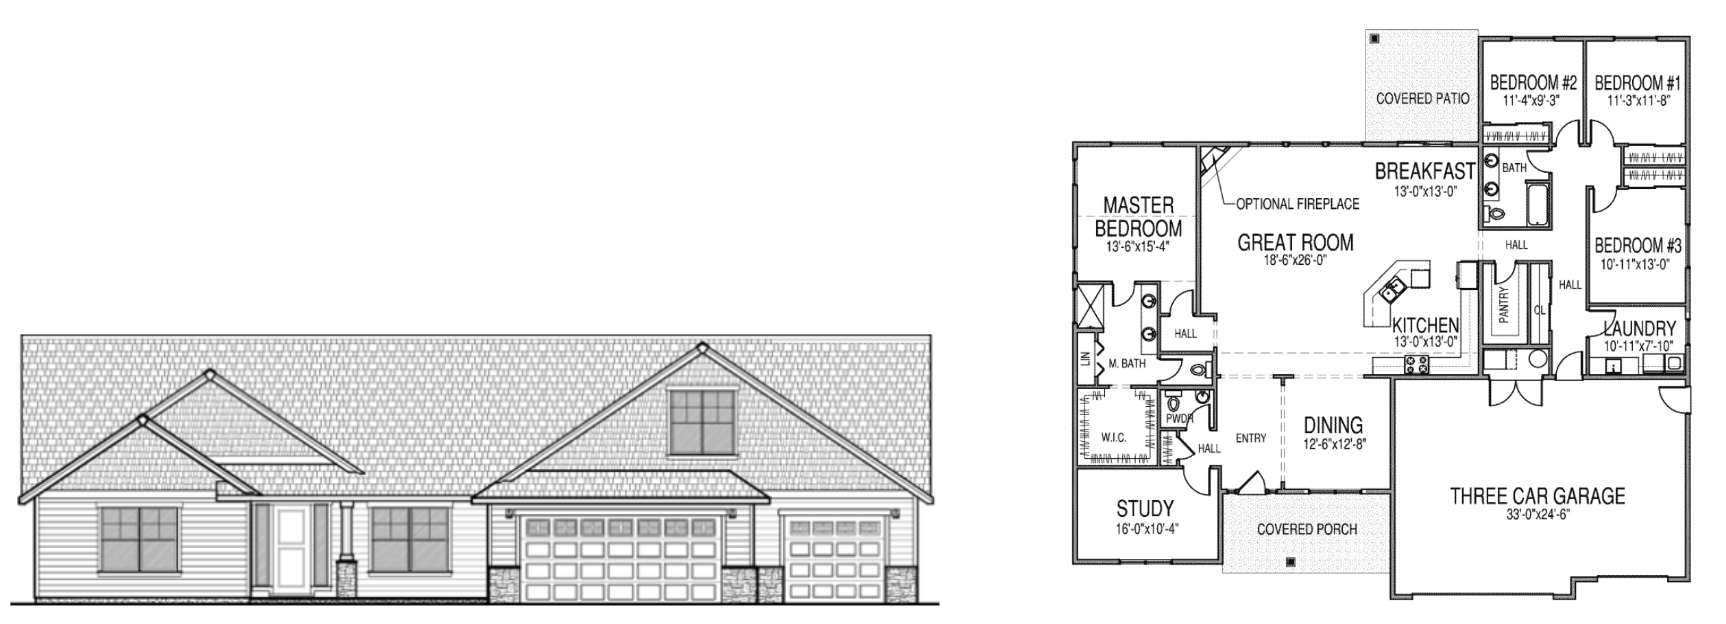 Tribute single story home floor plan with a master bedroom with a walk in closet and bathroom, 3 additional bedrooms, another bathroom, a great room, dining space, kitchen, pantry, closet, laundry room, study, three car garage, and a covered porch and patio